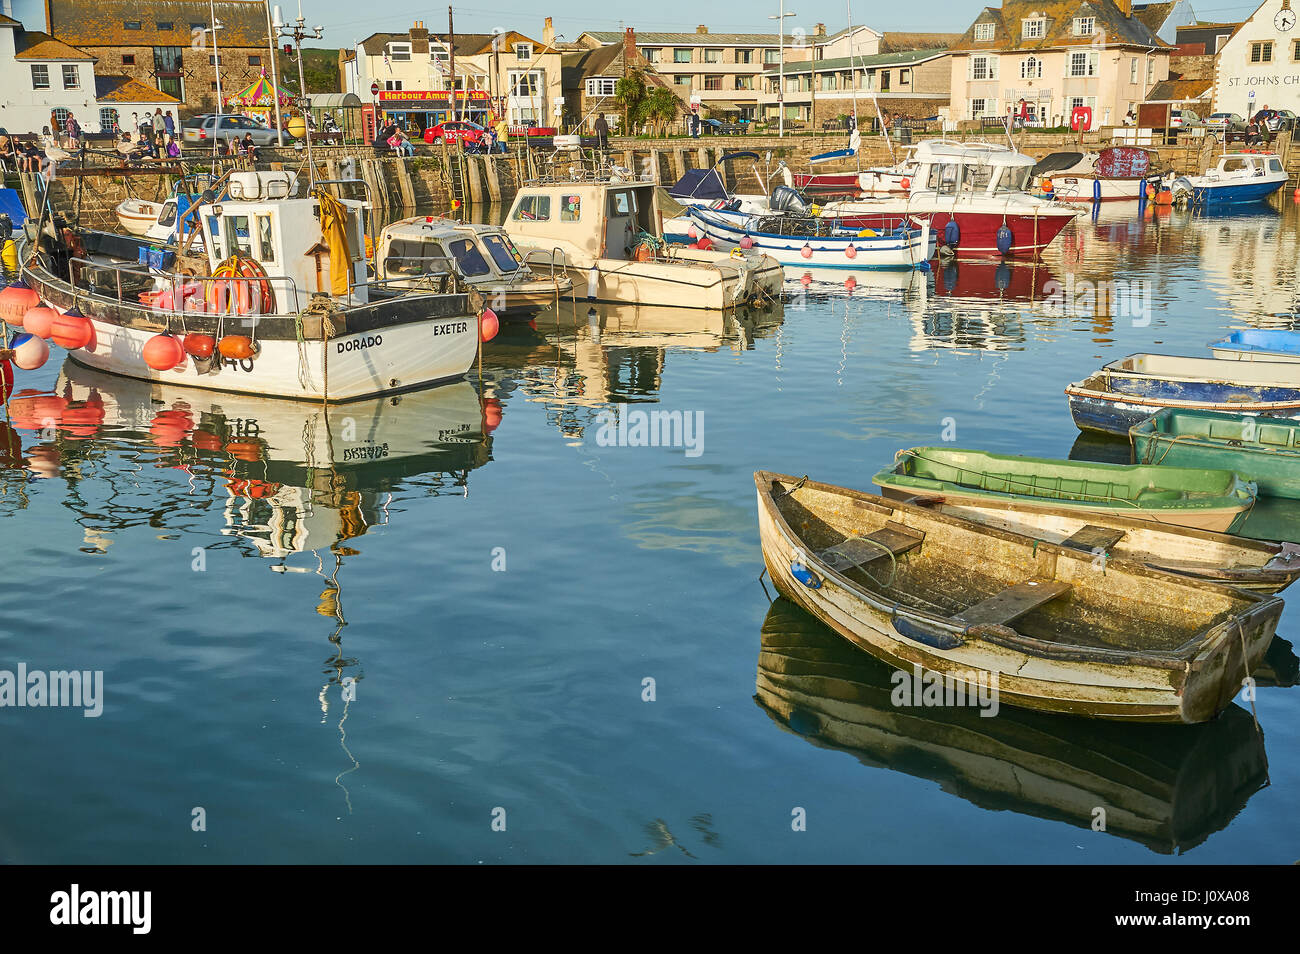 High tide, fishing boats and trawlers in the small seaside town of West Bay on Dorset's Jurassic Coast. Stock Photo